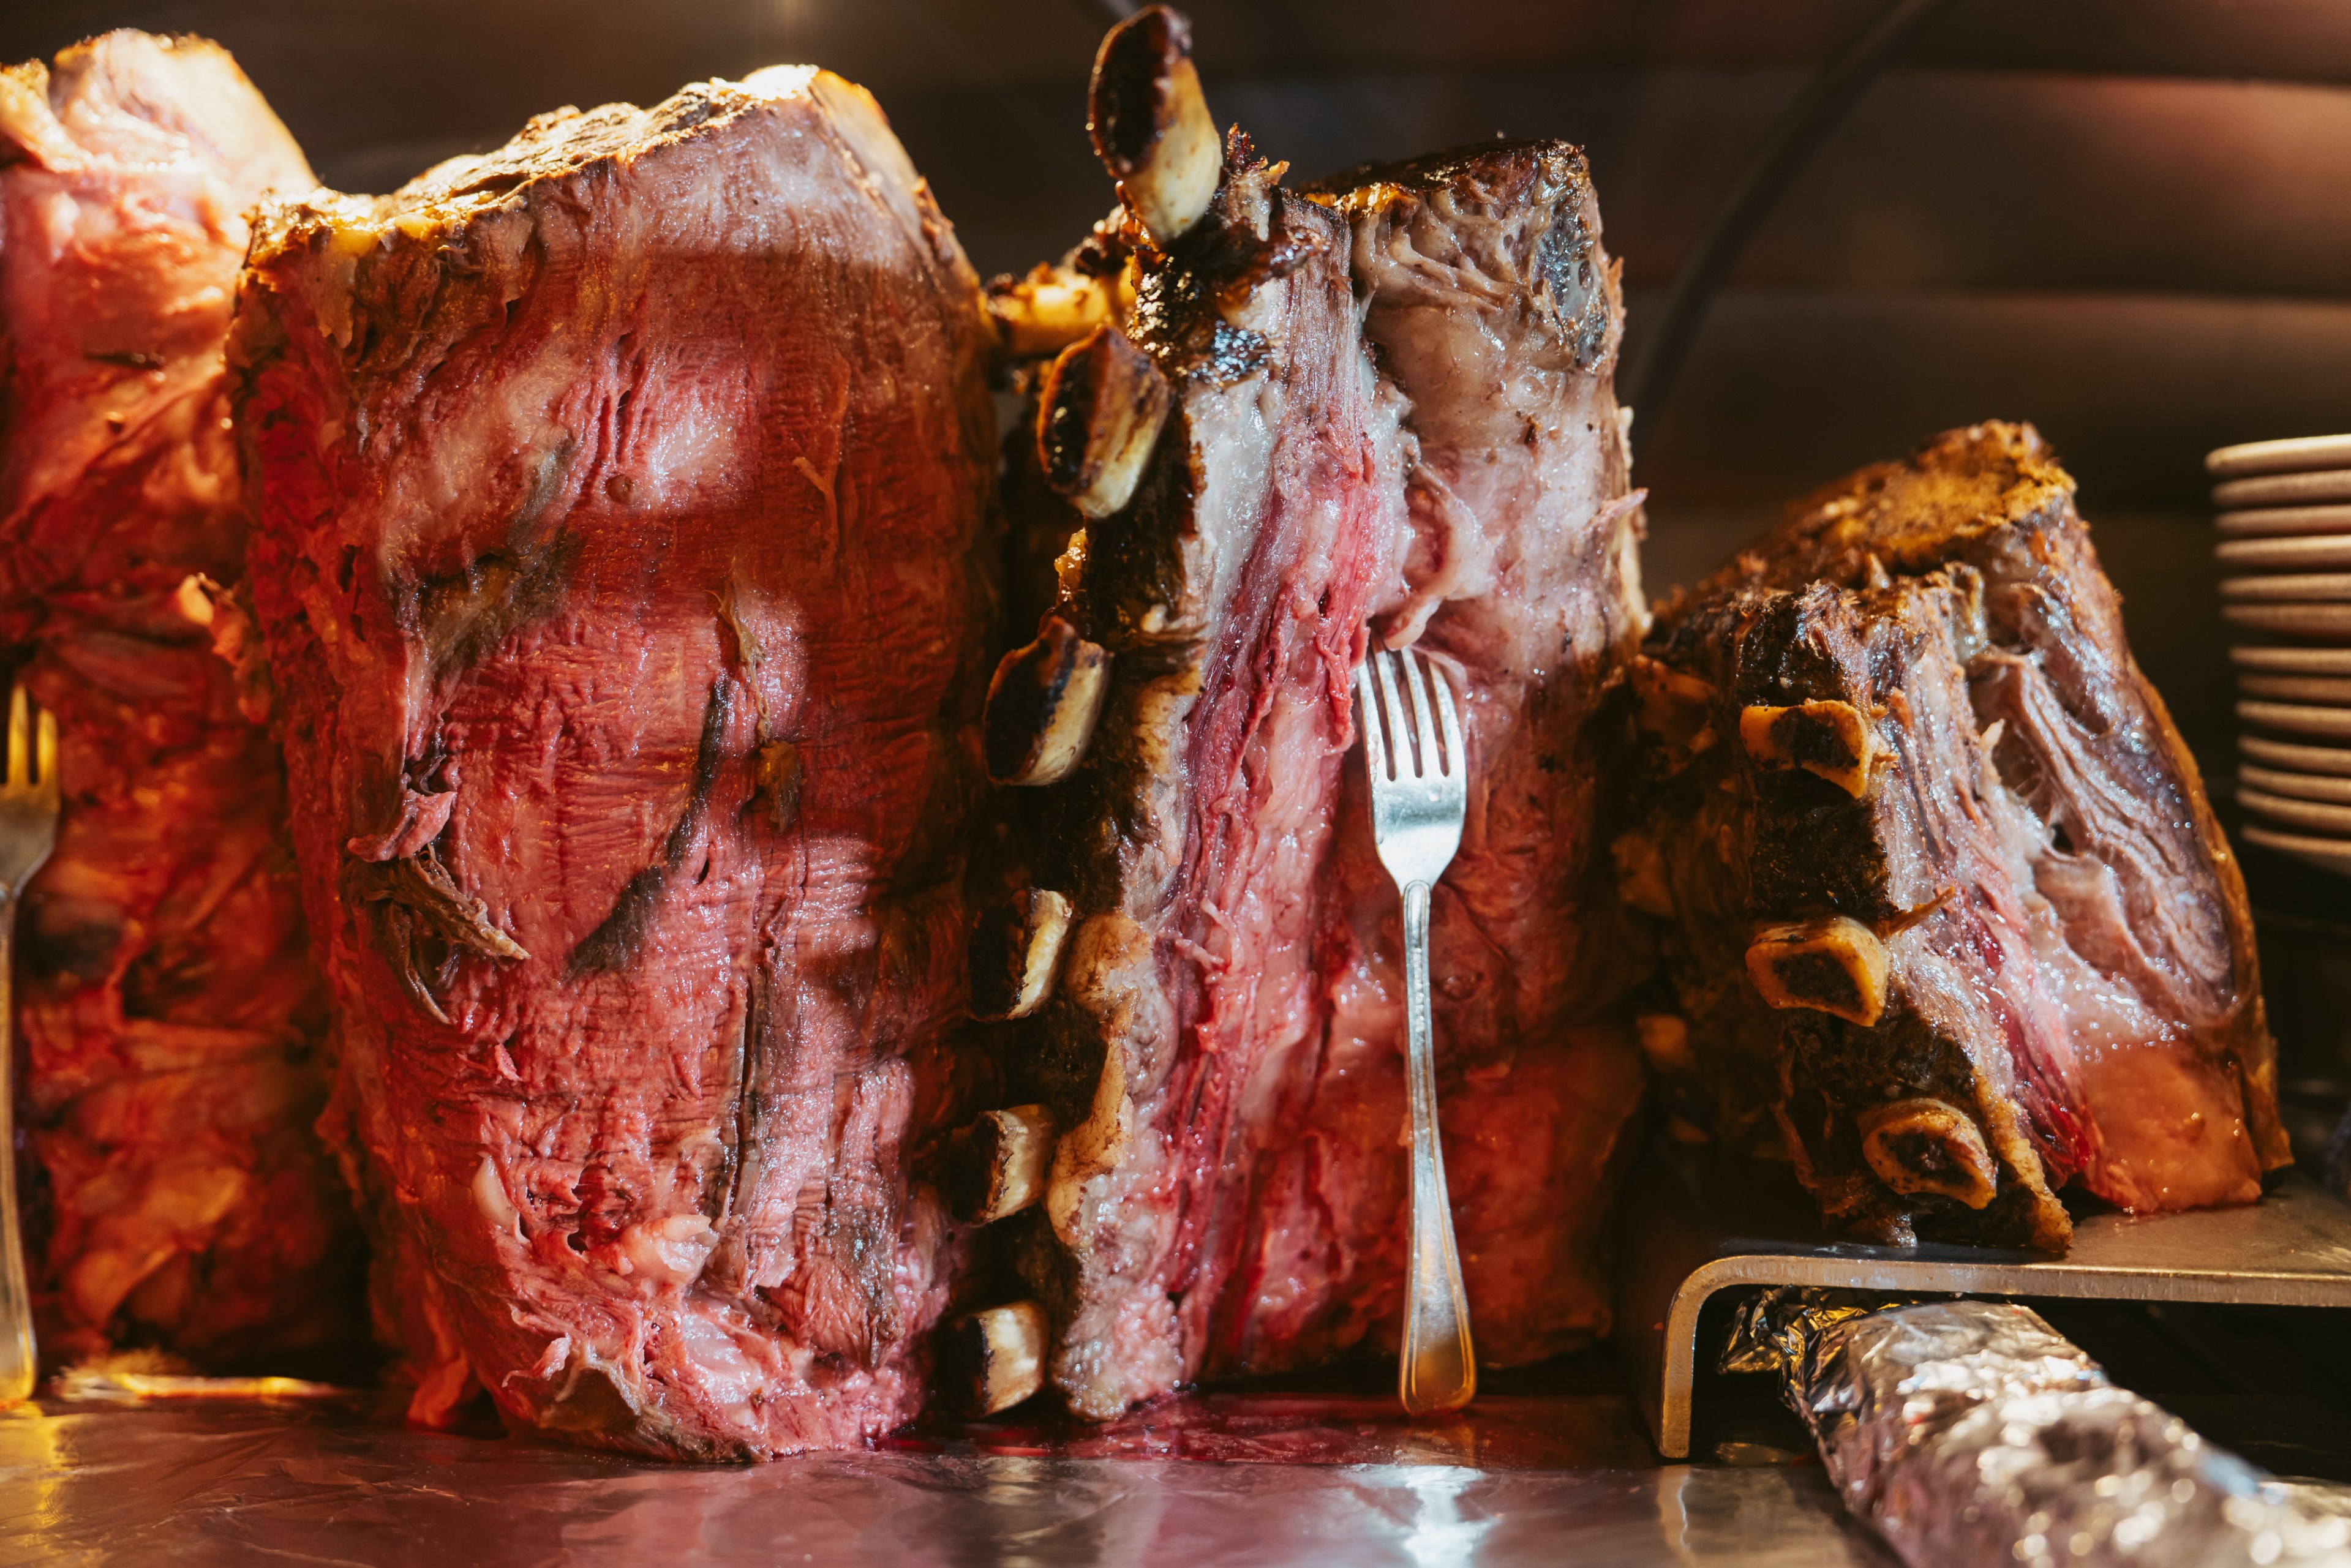 A variety of different cuts of meant being served at the House of Prime Rib.